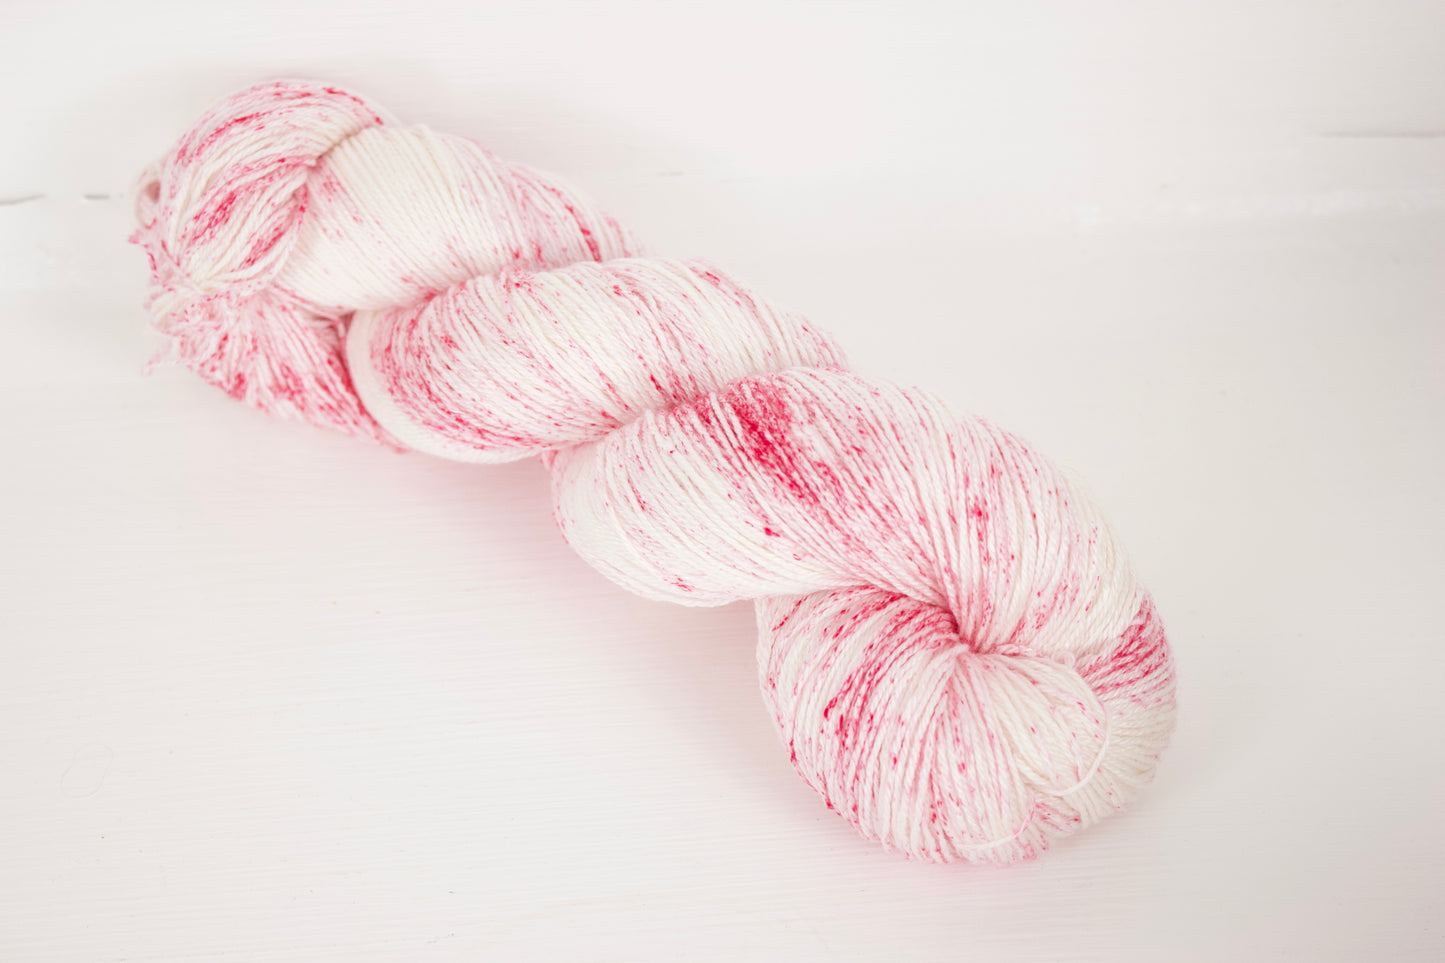 Raspberry Oat Mylk: Creamy white base with hot pink speckles in splotchy sections. Whole skein visible.